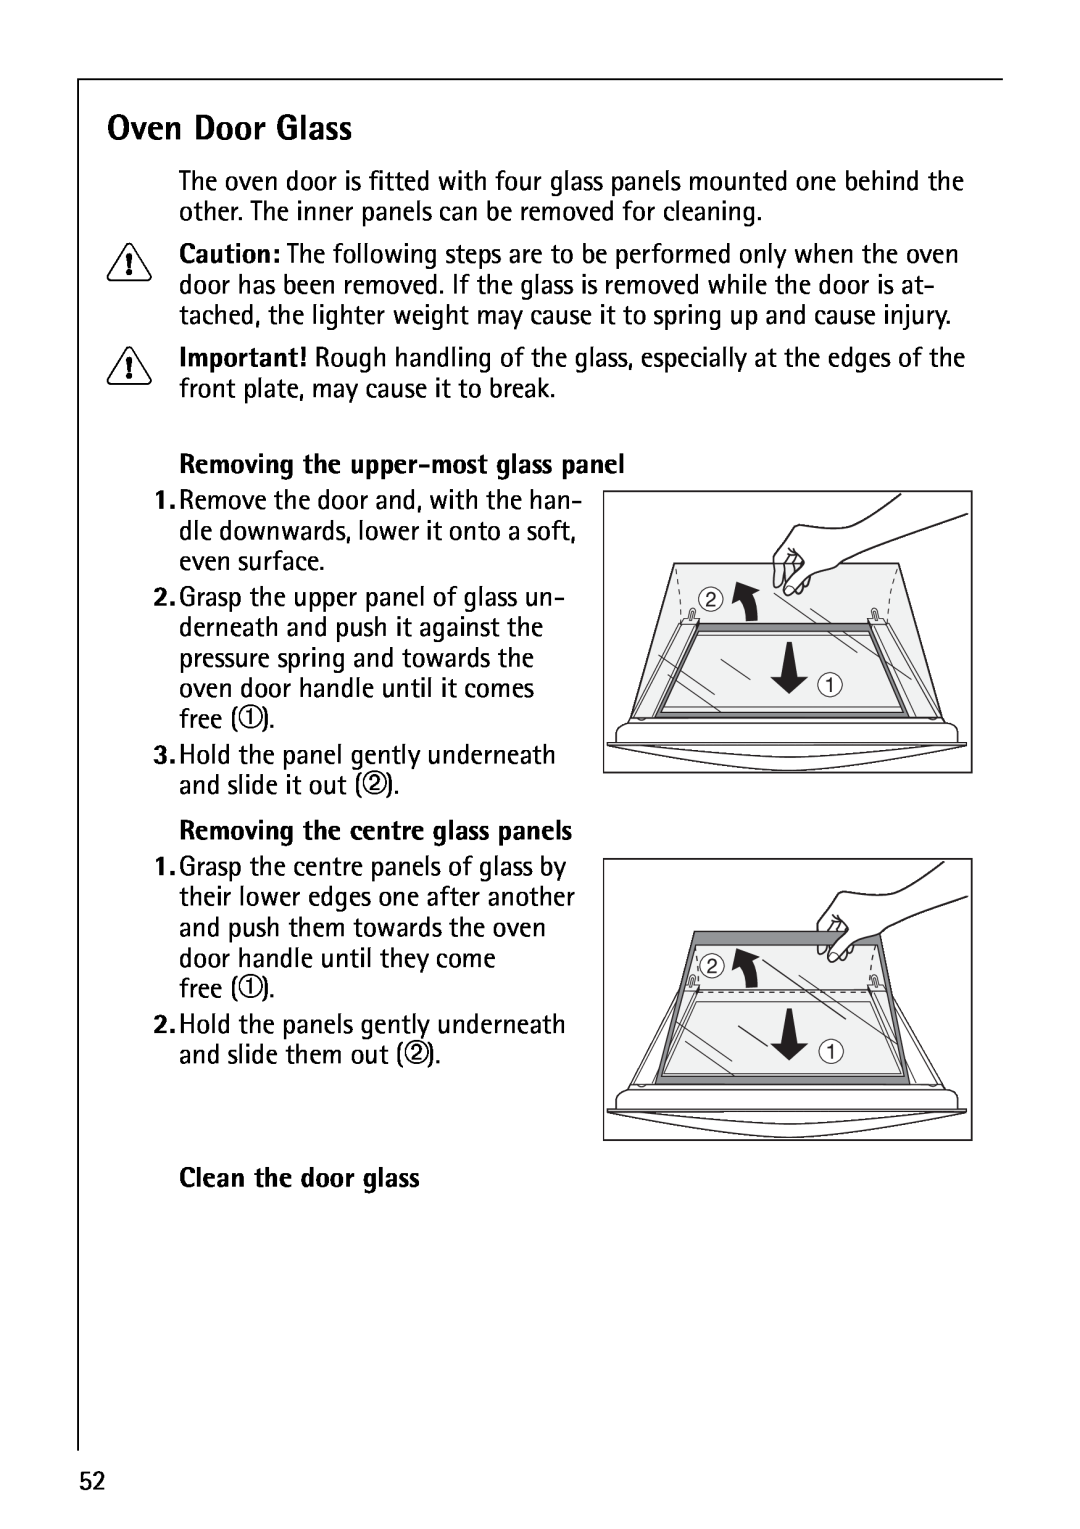 Electrolux B8871-4 manual Oven Door Glass, Removing the upper-most glass panel, Removing the centre glass panels 